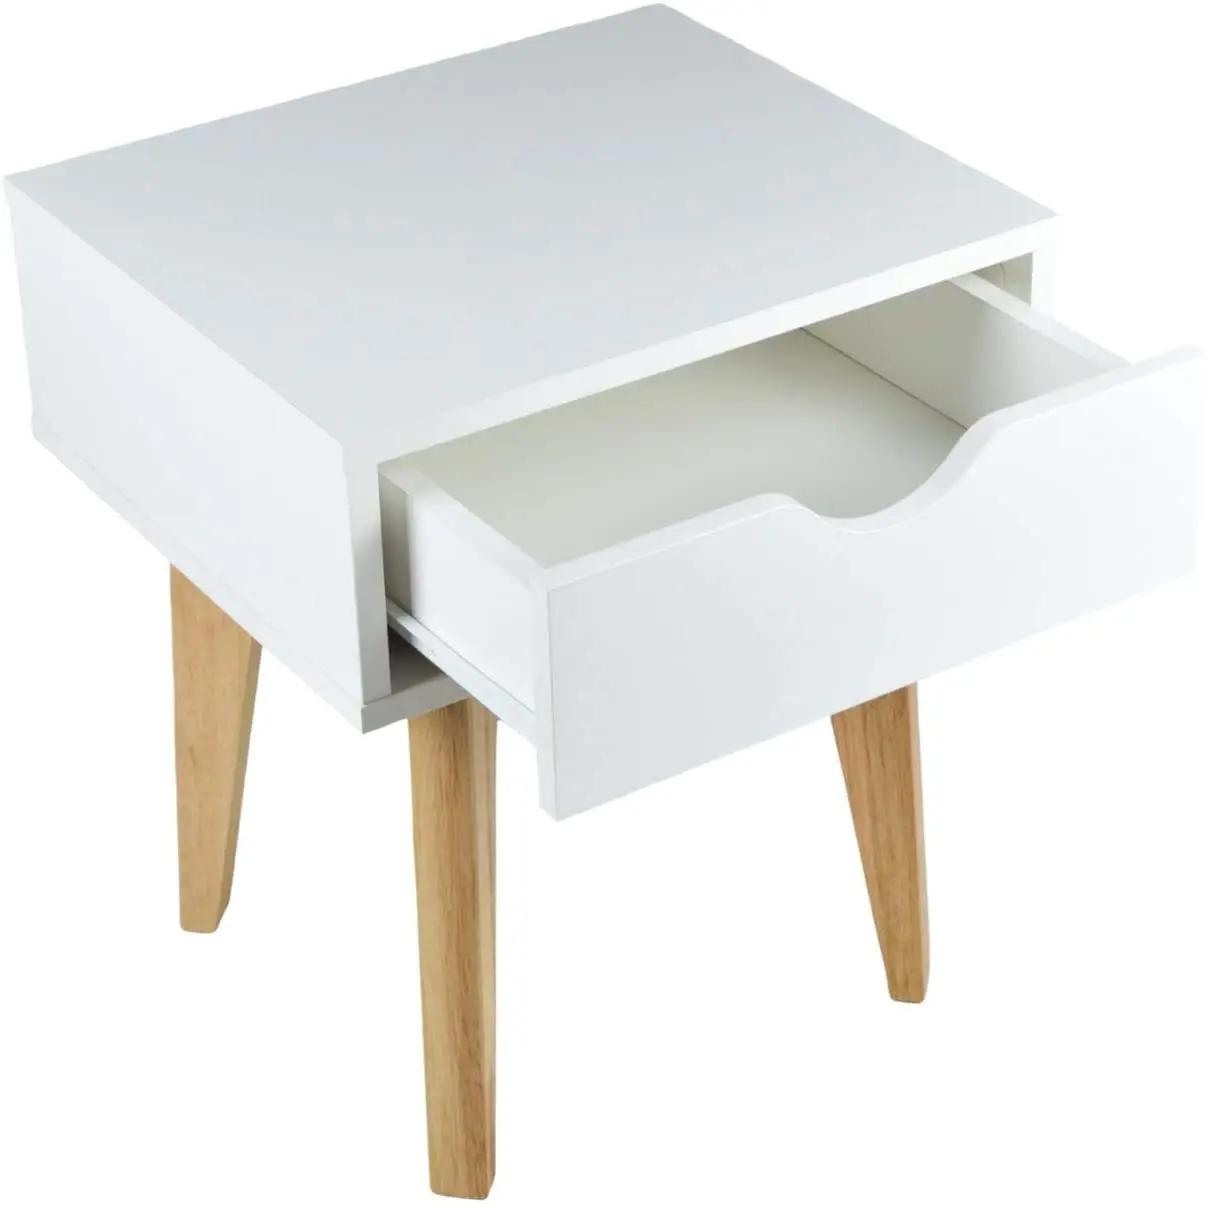 Medieval Modern Nightstand Nightstand - High quality wood - available in black and white natural wood